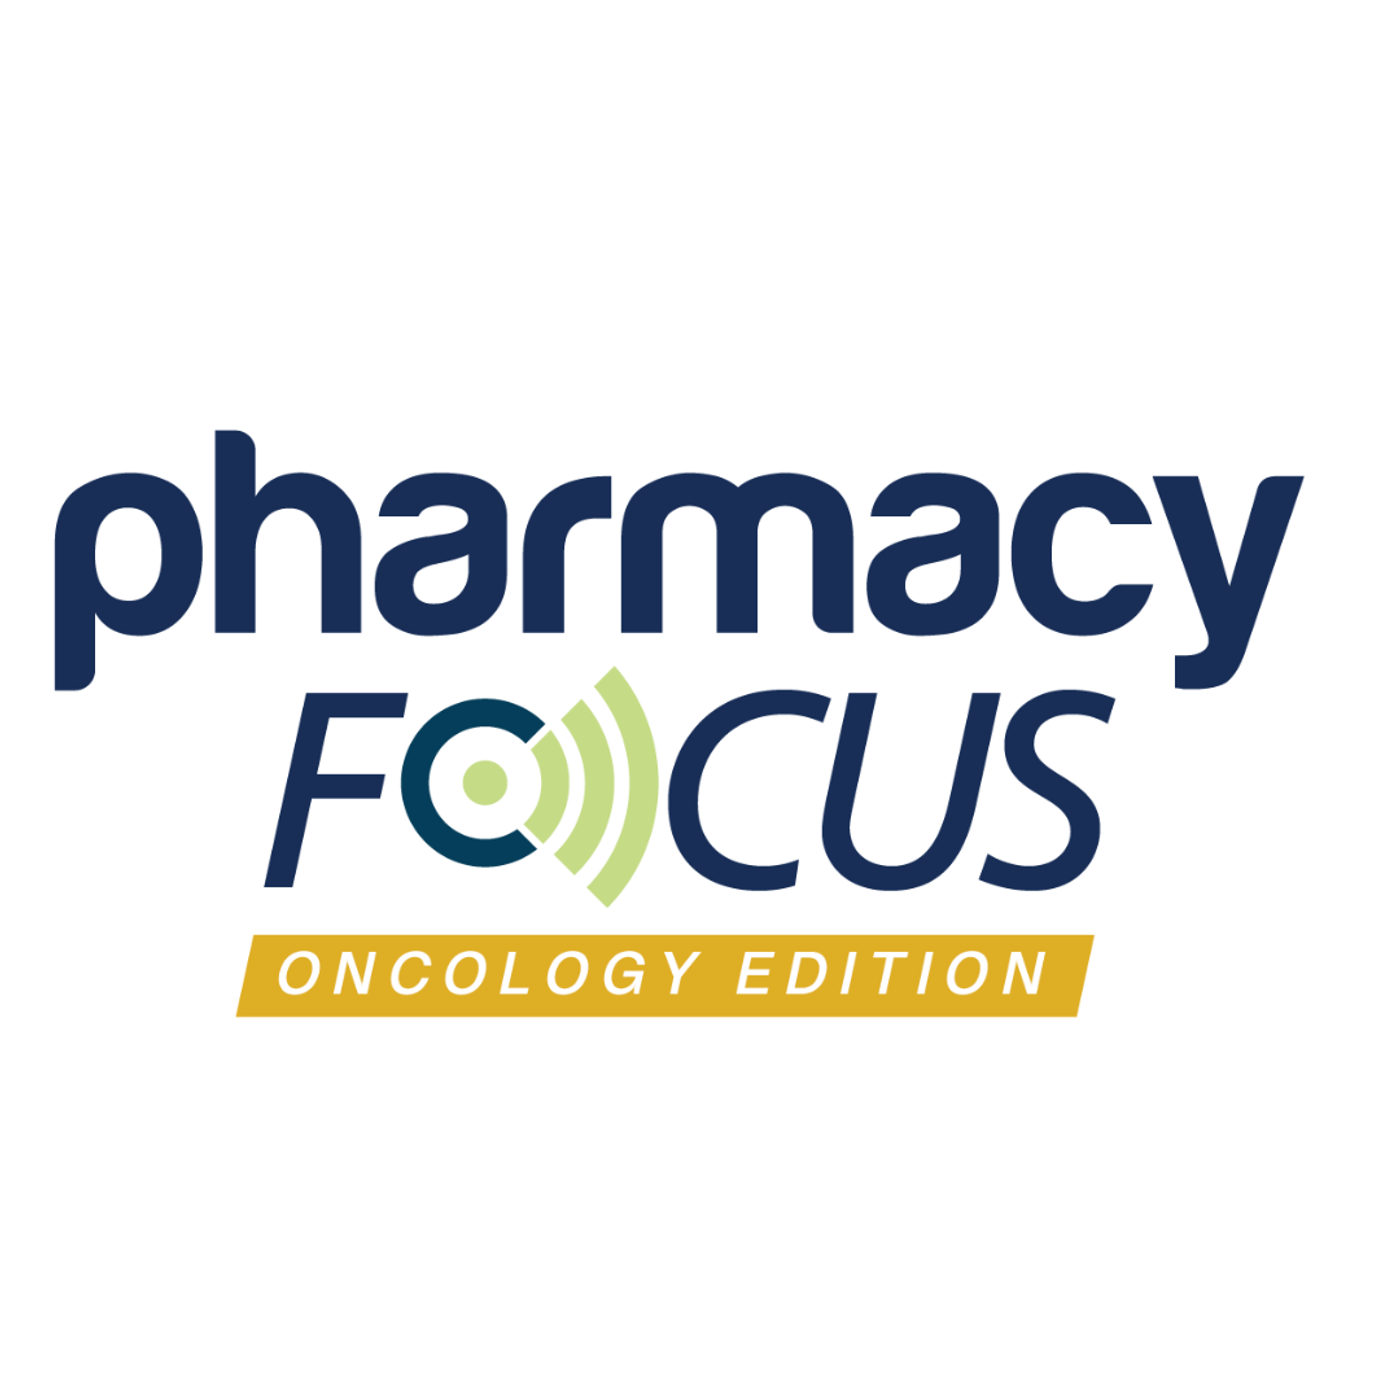 S2 Ep23: Pharmacy Focus: Oncology Edition- Pharmacists Pivotal Role in Driving Clinical Trial Research